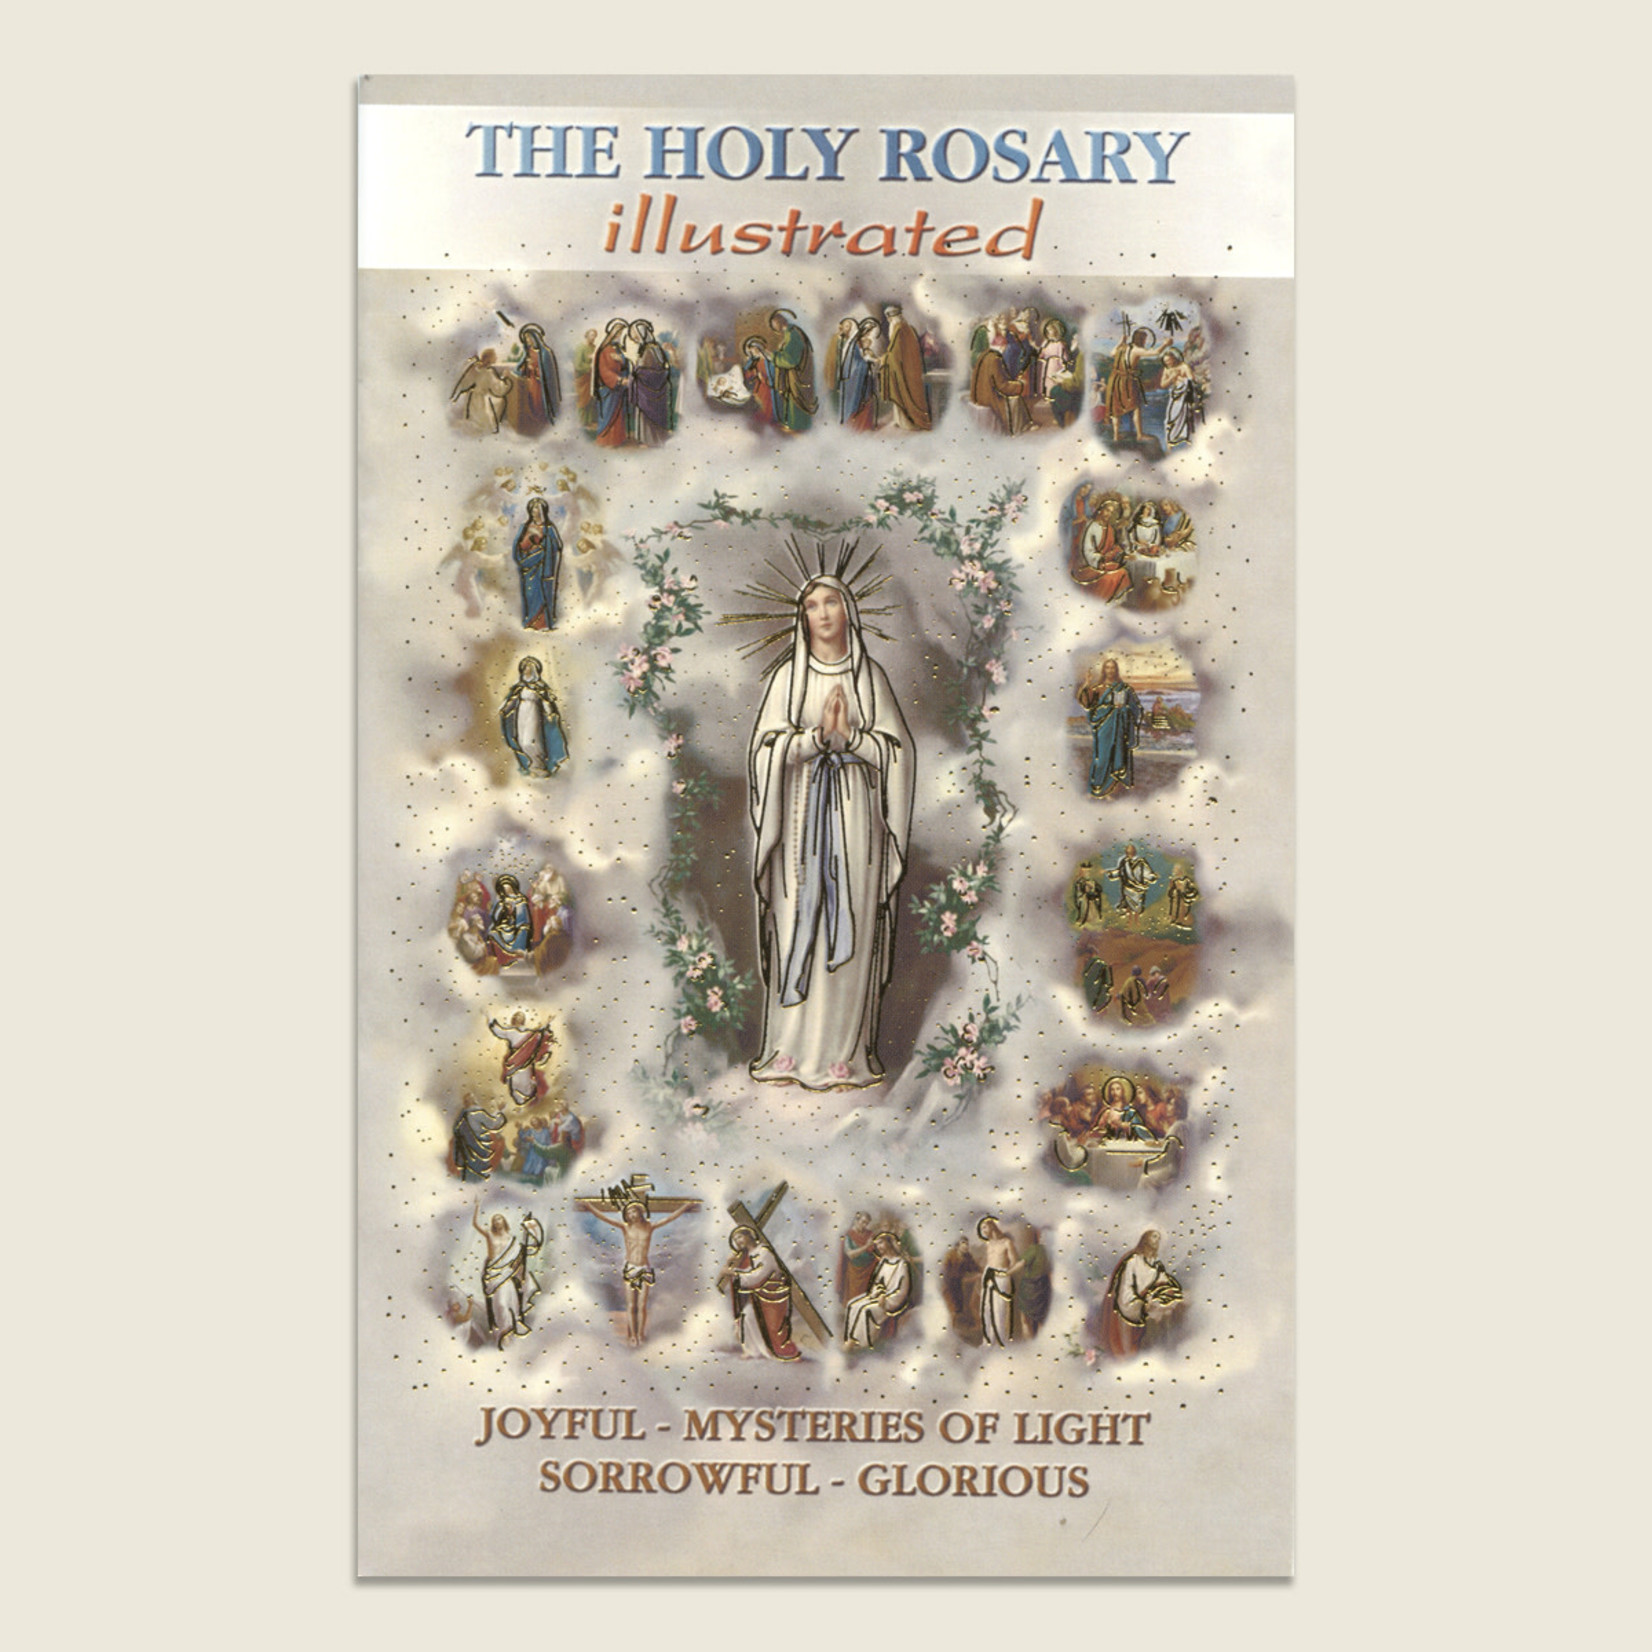 HR-03 - The Holy Rosary Illustrated (Pocket)